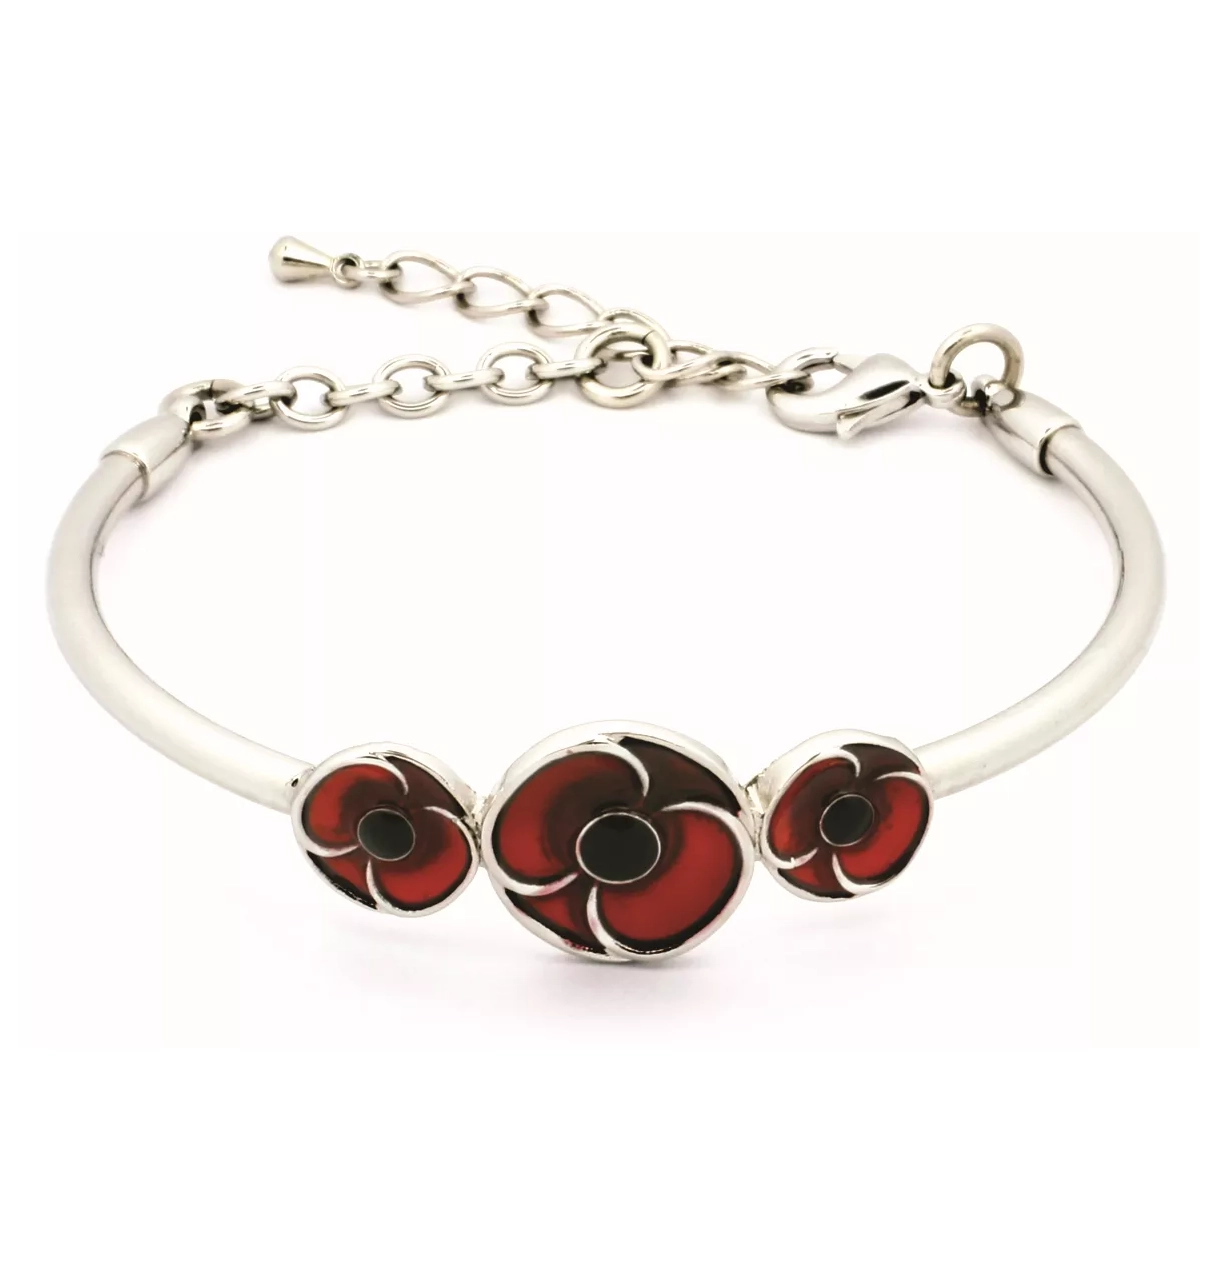 Honour Our Fallen Heroes with Poppy Jewellery | Military Shop